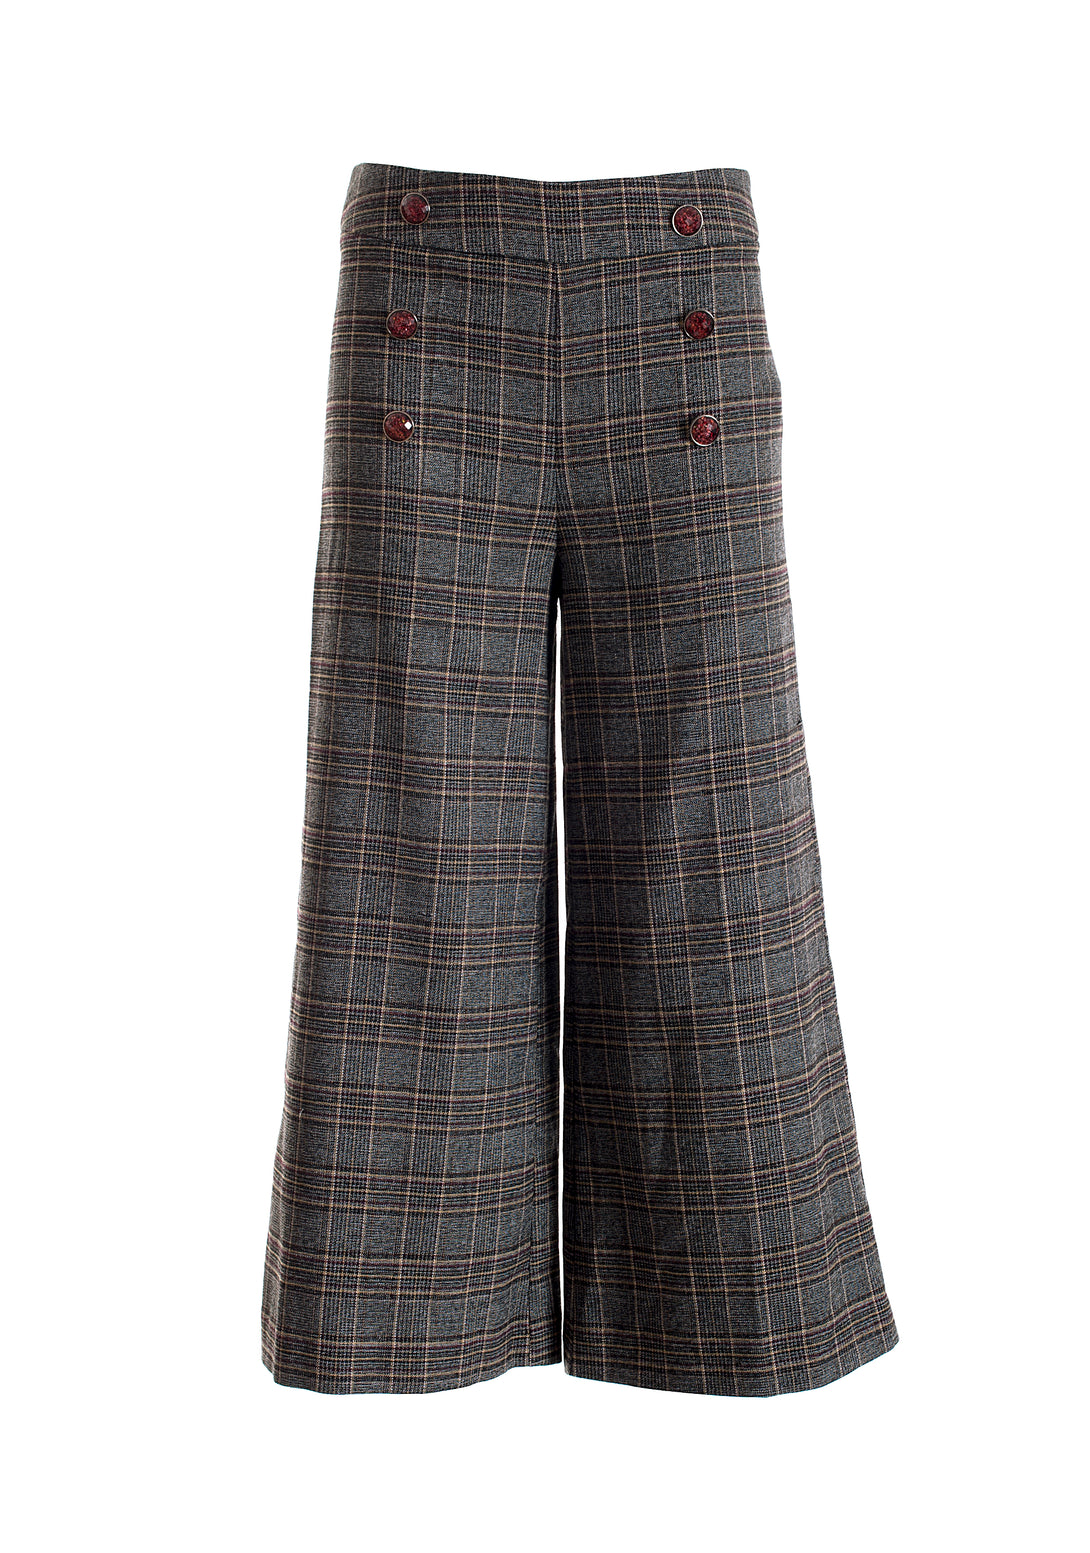 Pants culotte regular fit made in Prince of Wales fabric